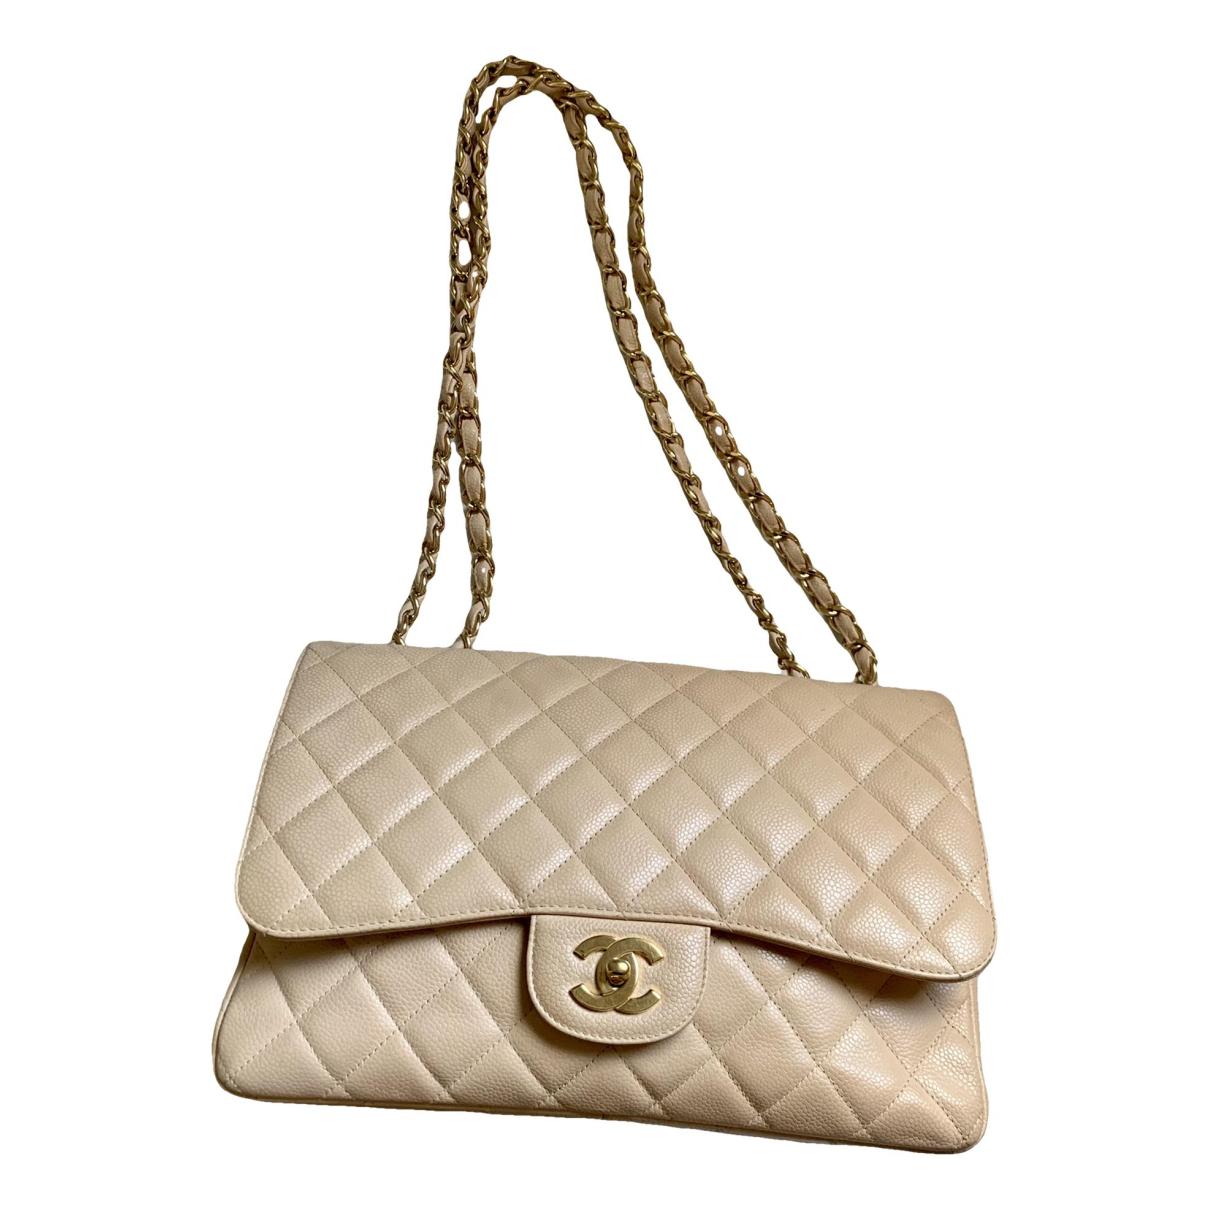 Timeless/classique leather handbag Chanel Gold in Leather - 31020435